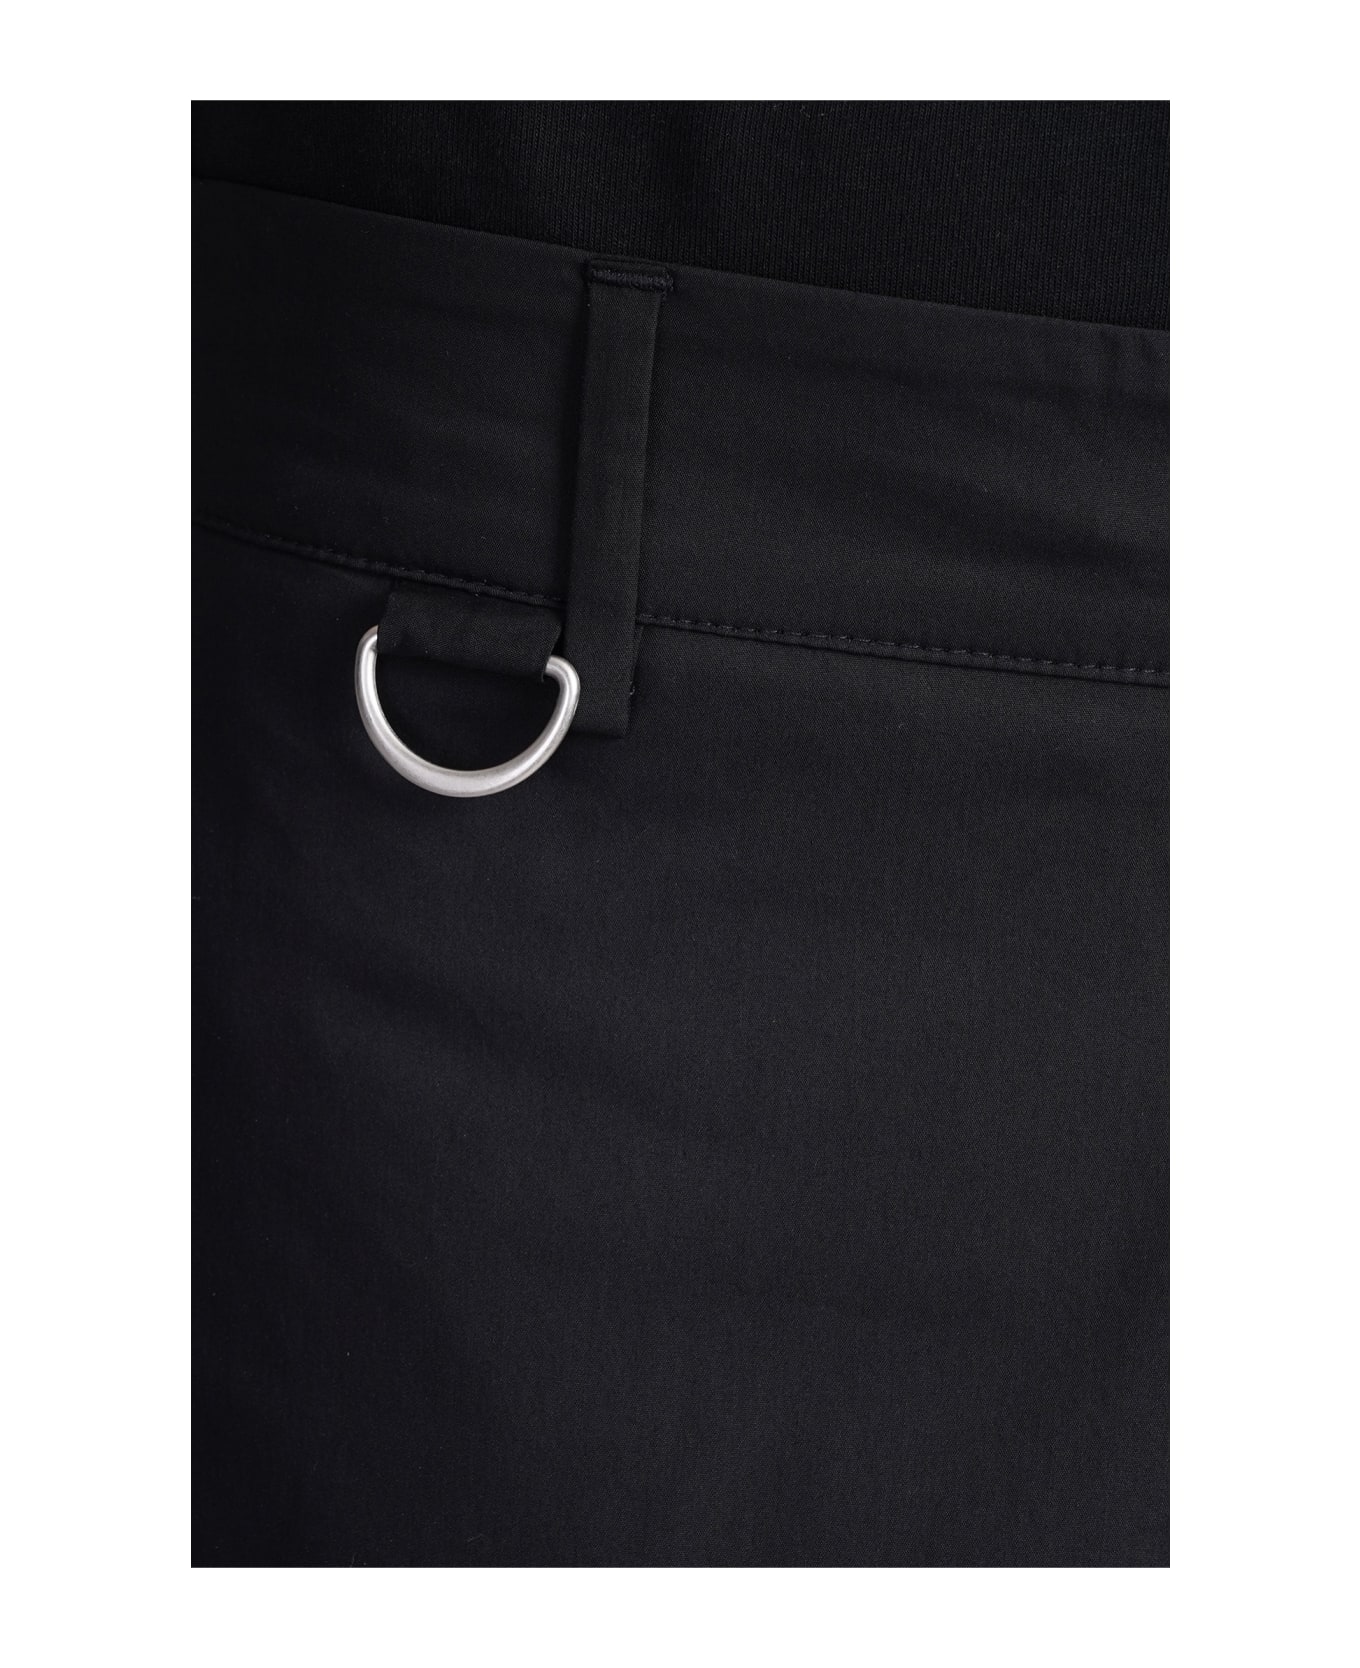 Low Brand George Pants In Black Cotton - black ボトムス